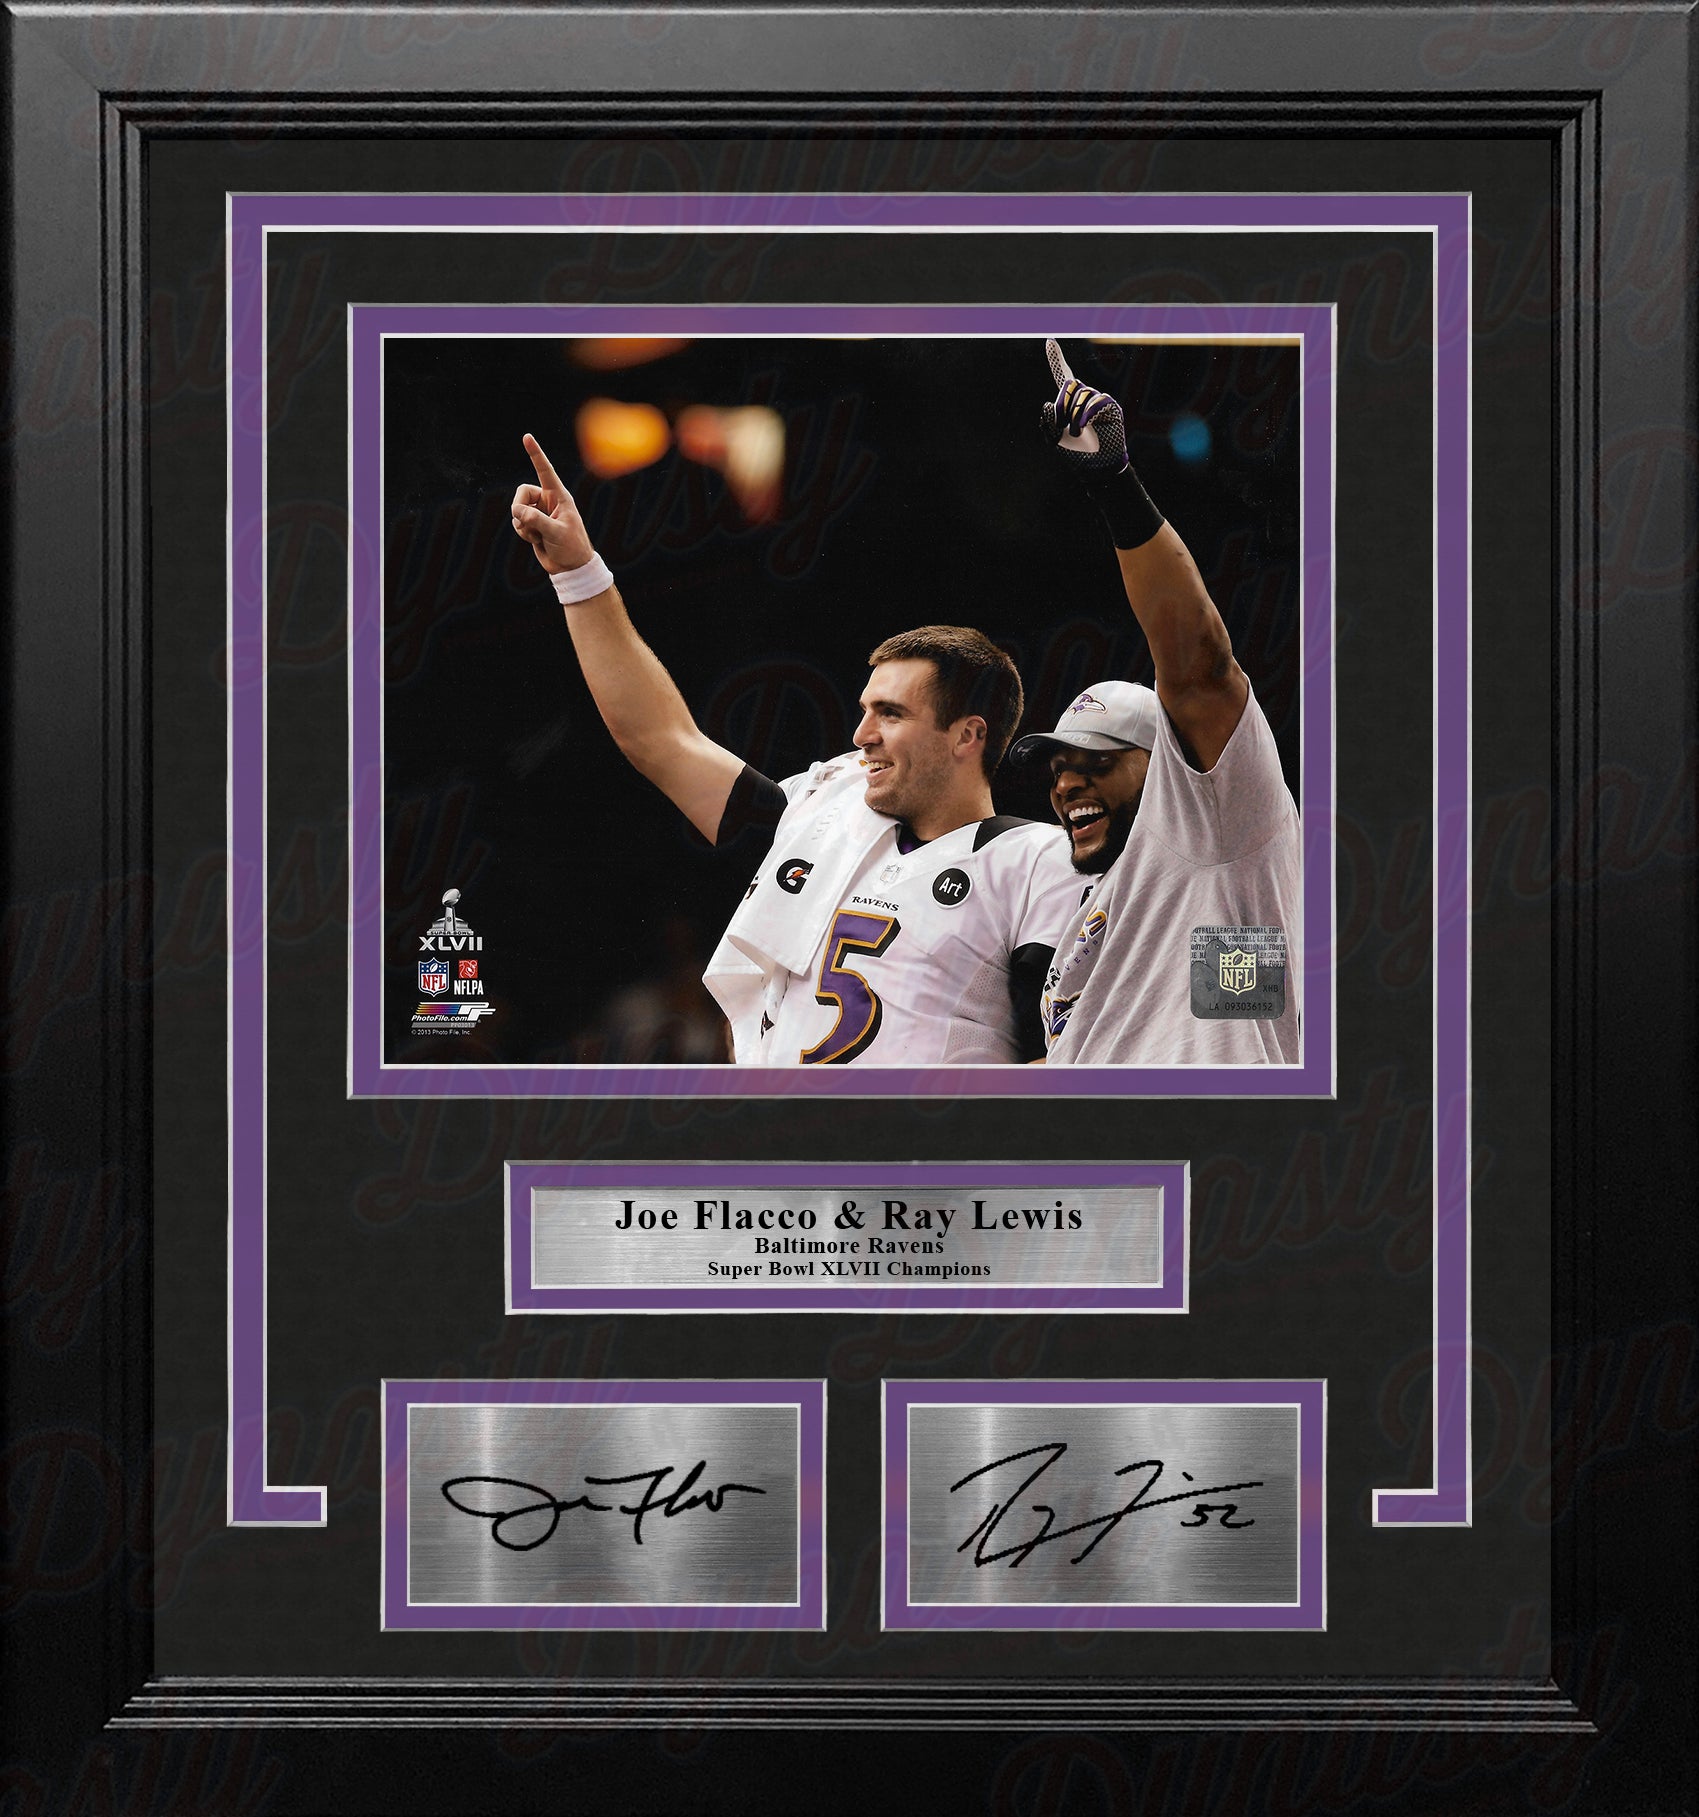 Joe Flacco & Ray Lewis Baltimore Ravens Super Bowl Champs 8x10 Framed Photo  with Engraved Autographs